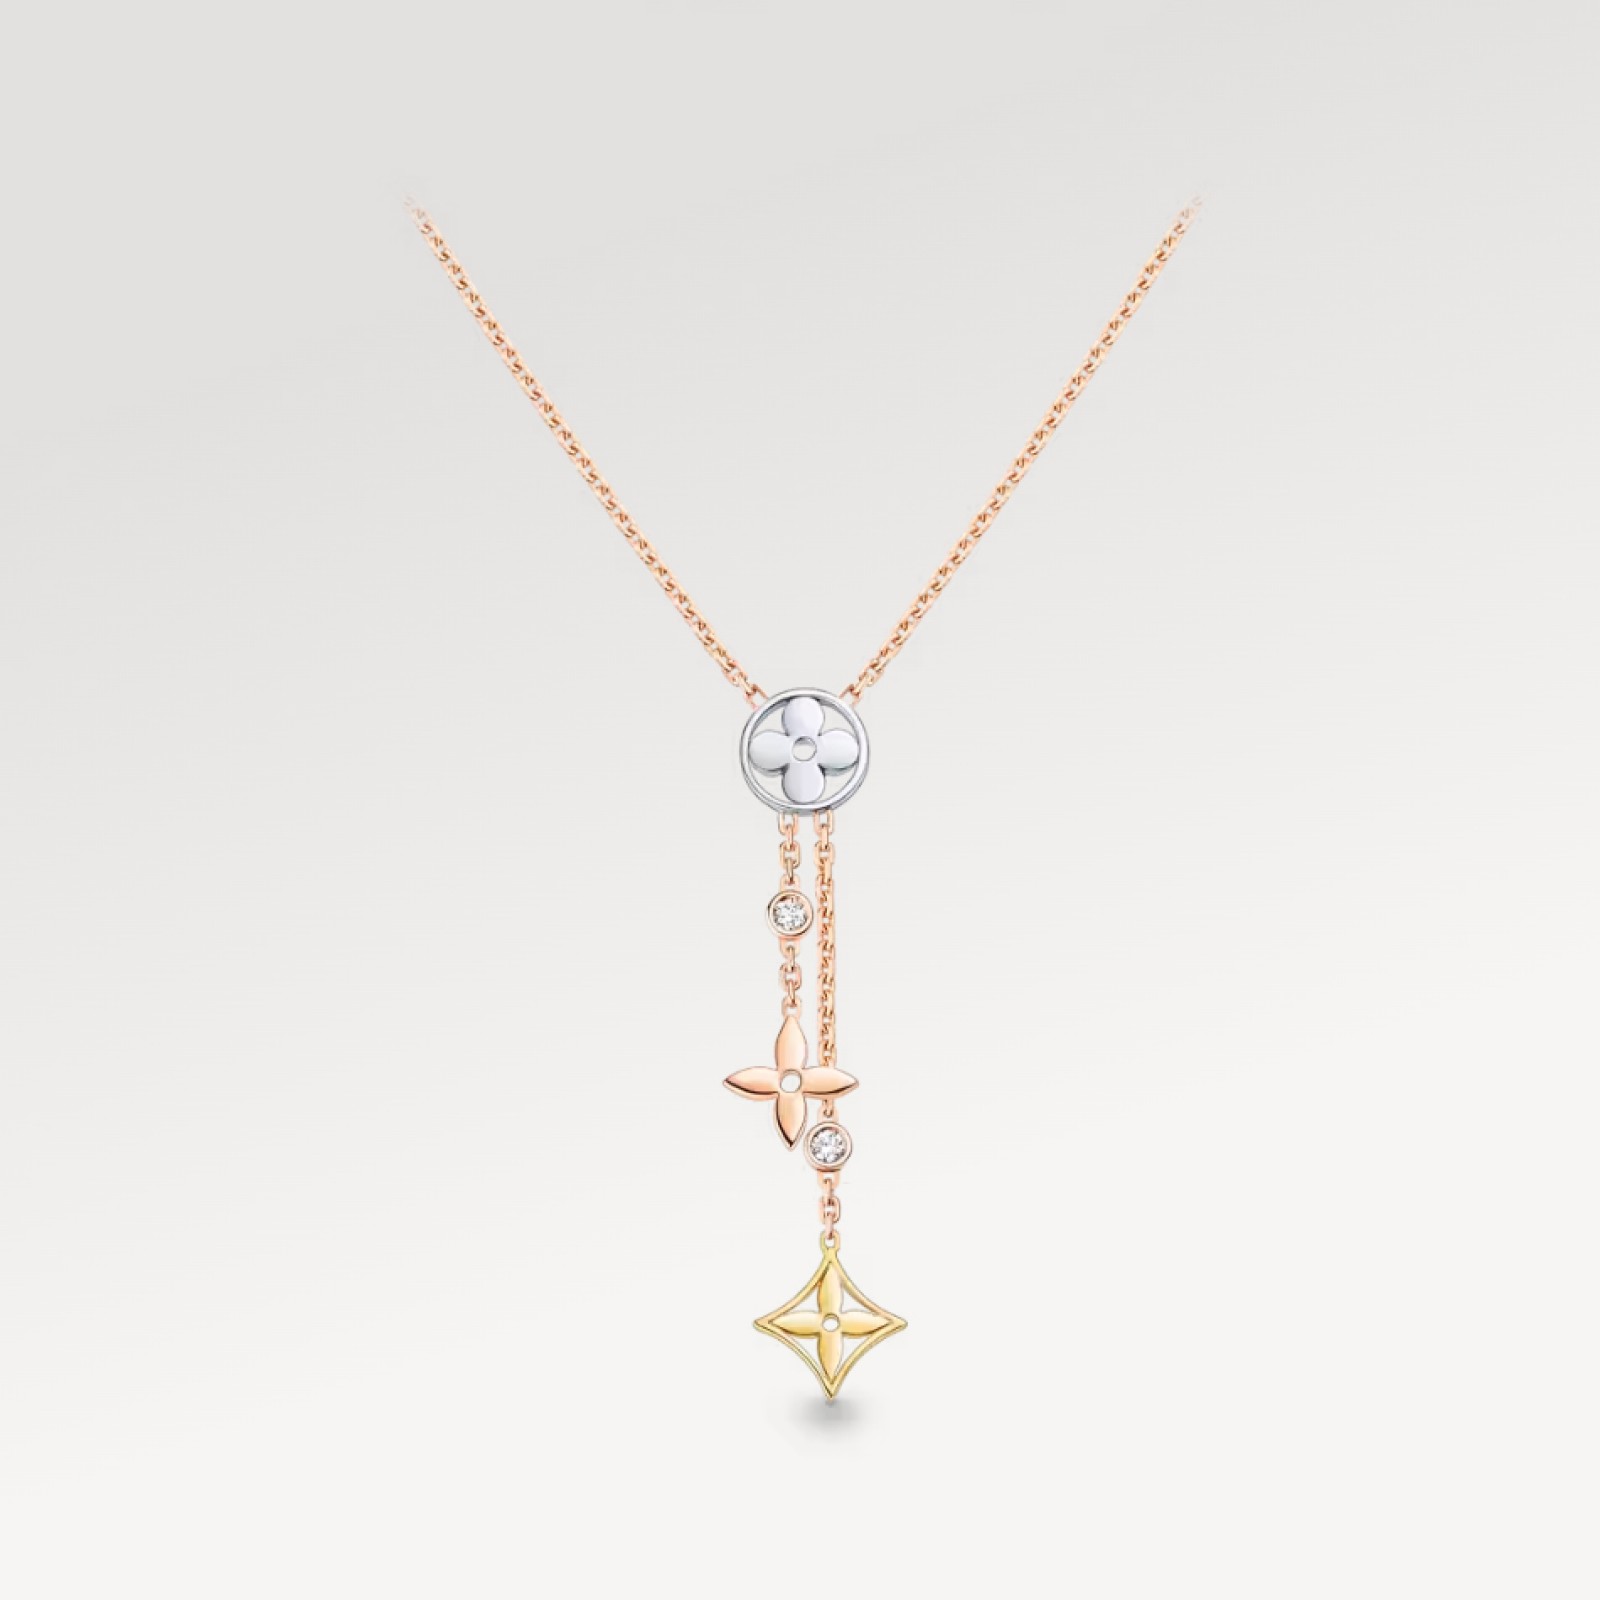 IDYLLE BLOSSOM Y PENDANT, 3 GOLDS AND DIAMONDS